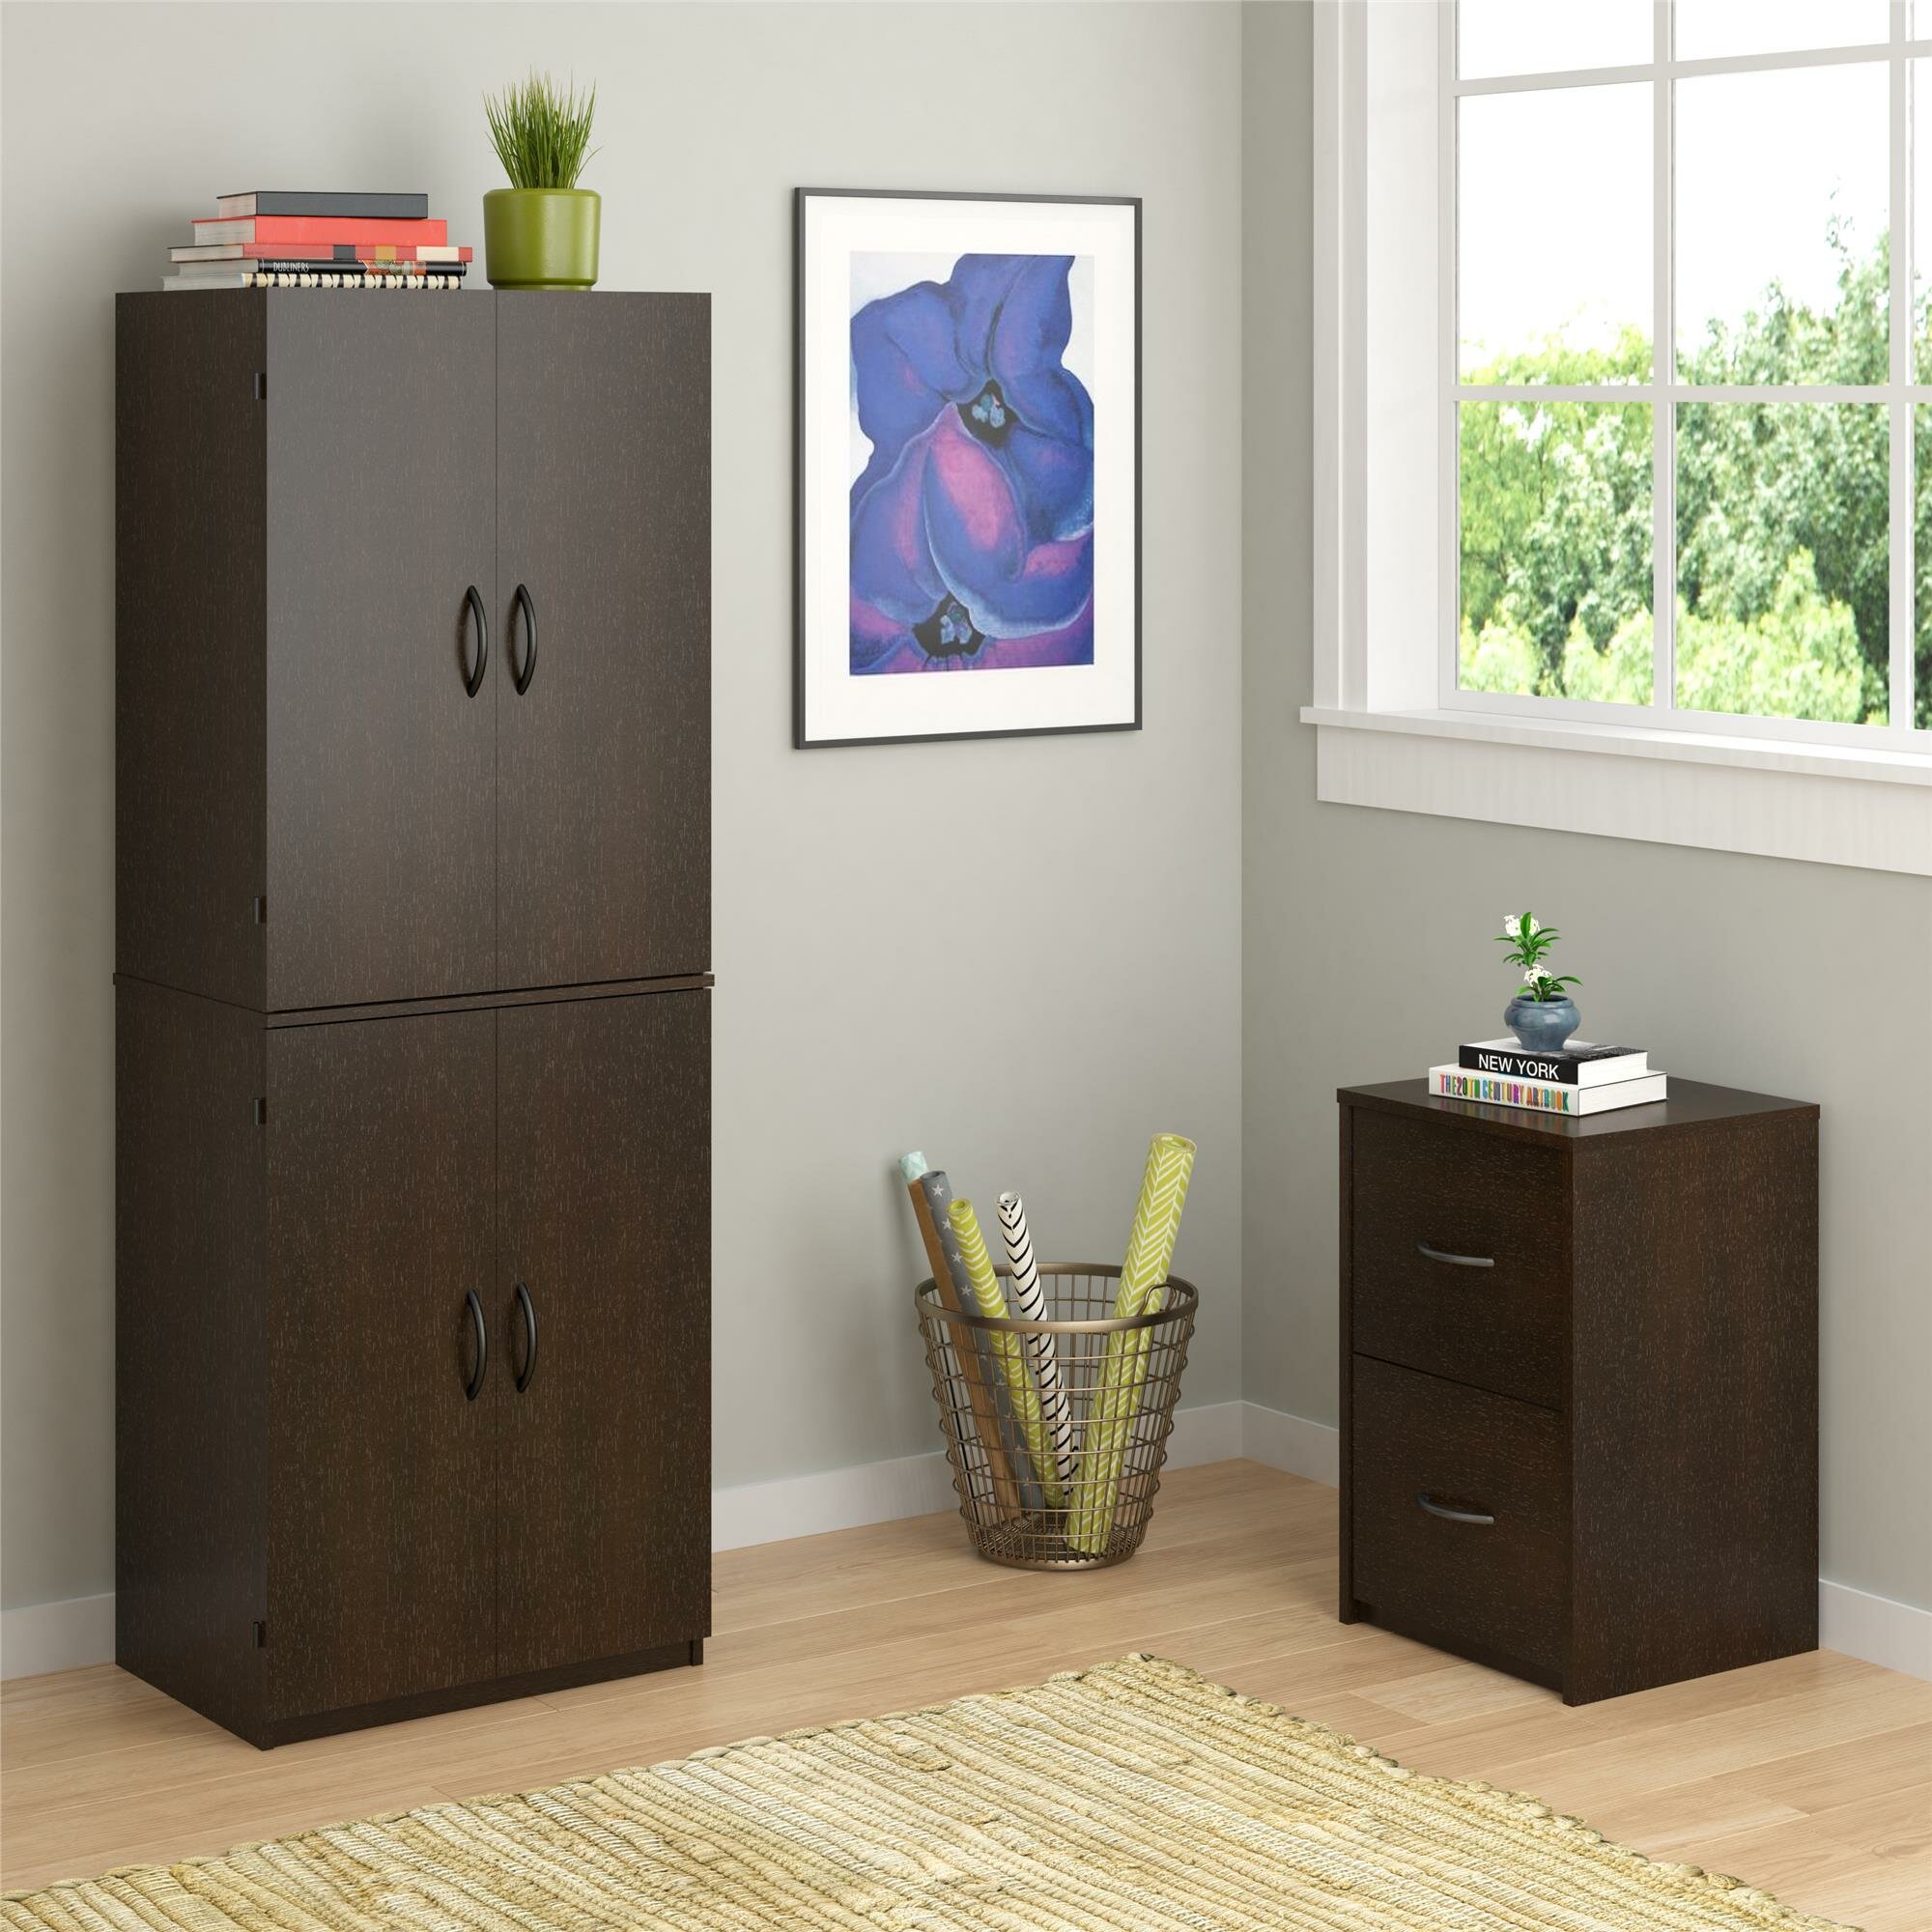 Our Best Office Cabinet Deals 